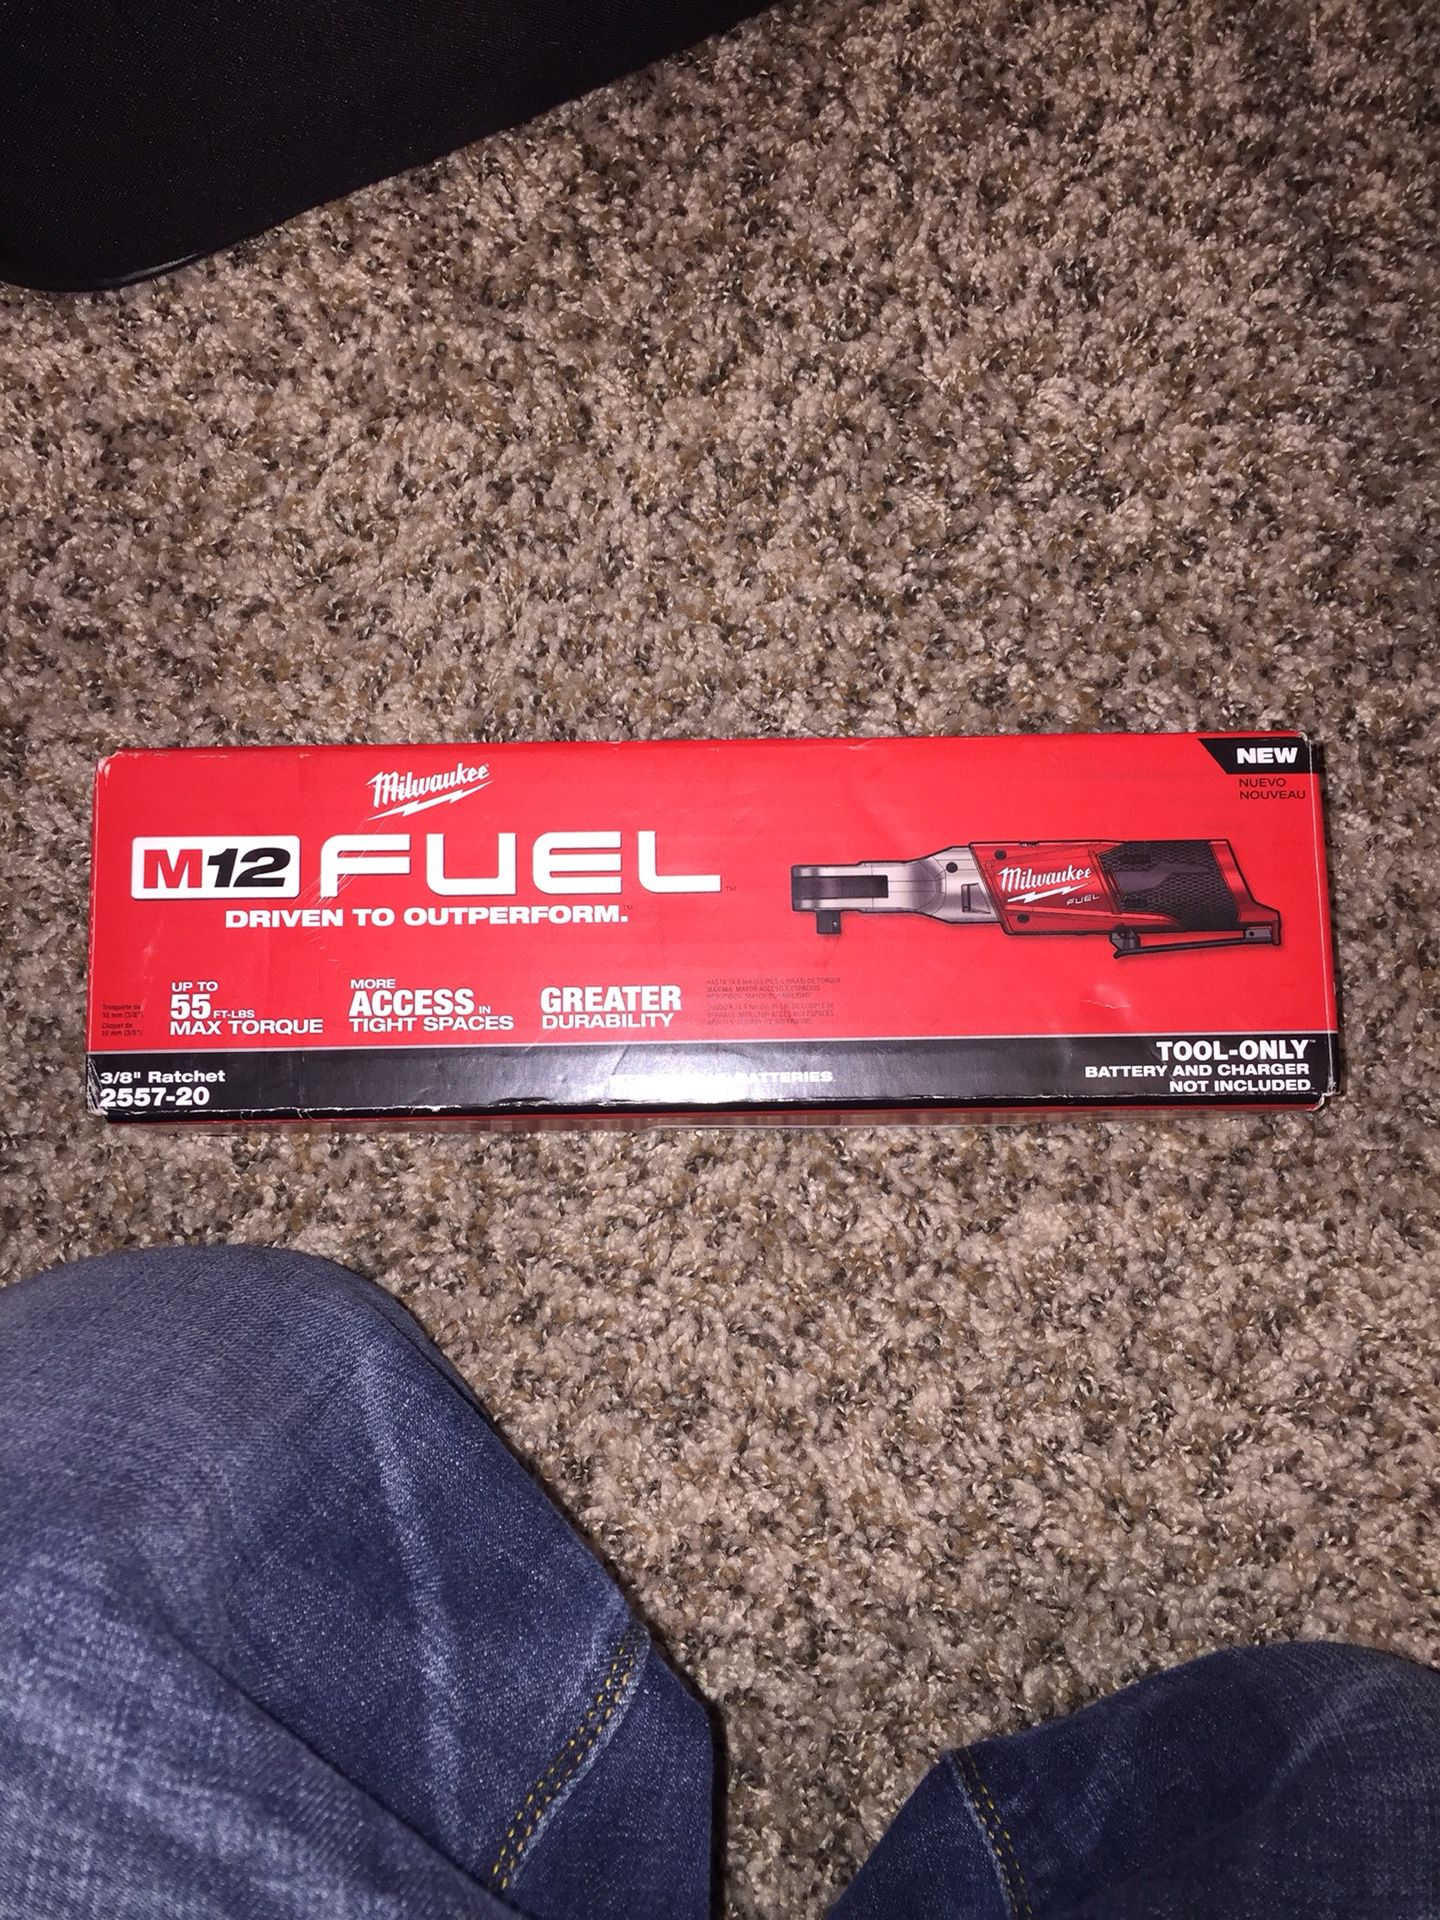 M12 fuel 3/8” ratchet brand new in box tool only